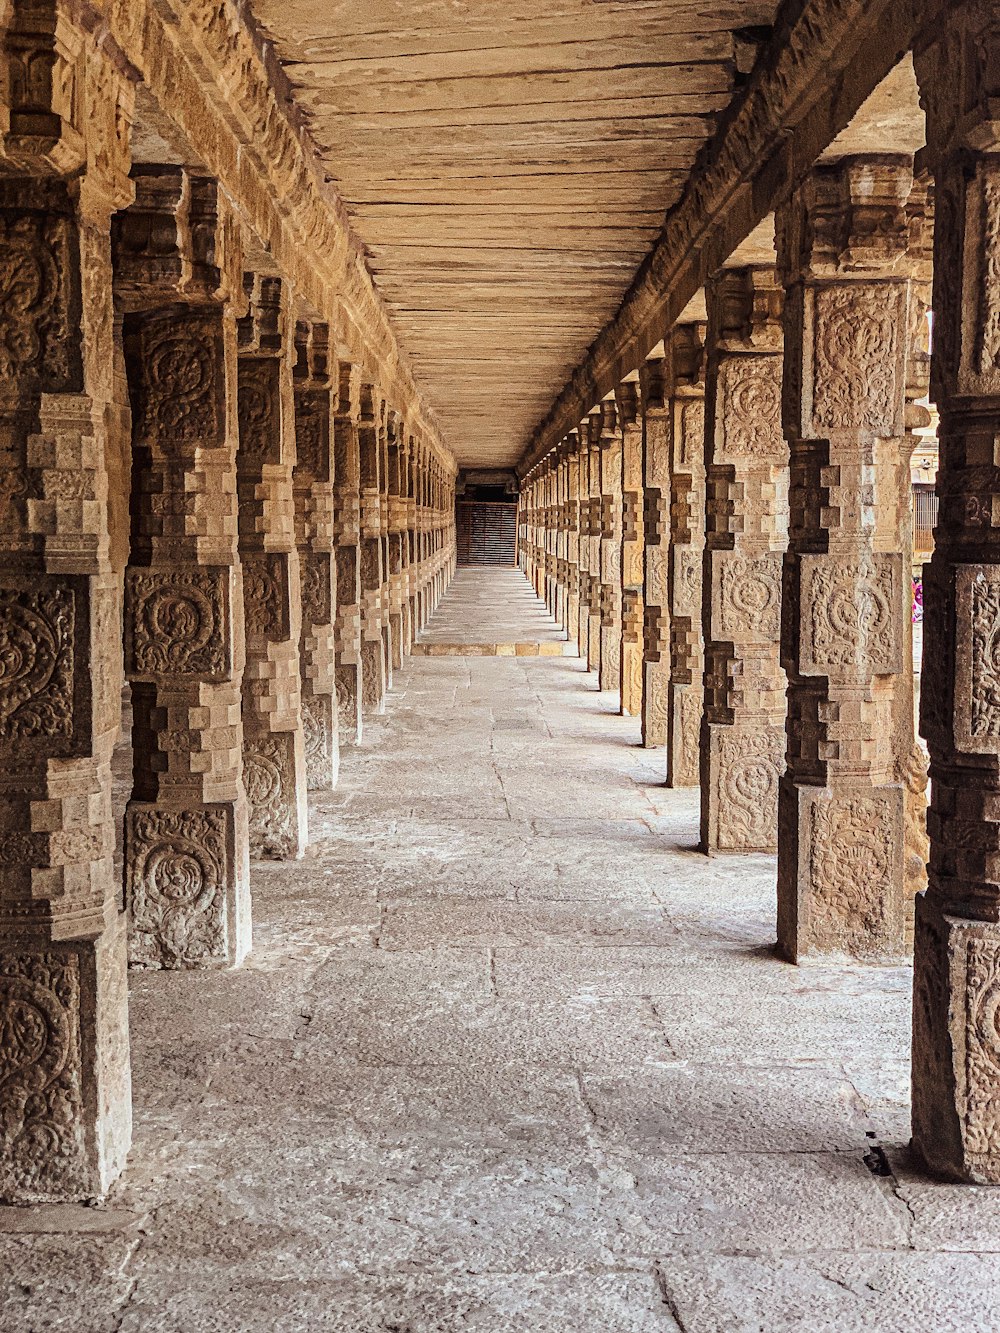 a row of pillars with carvings on them